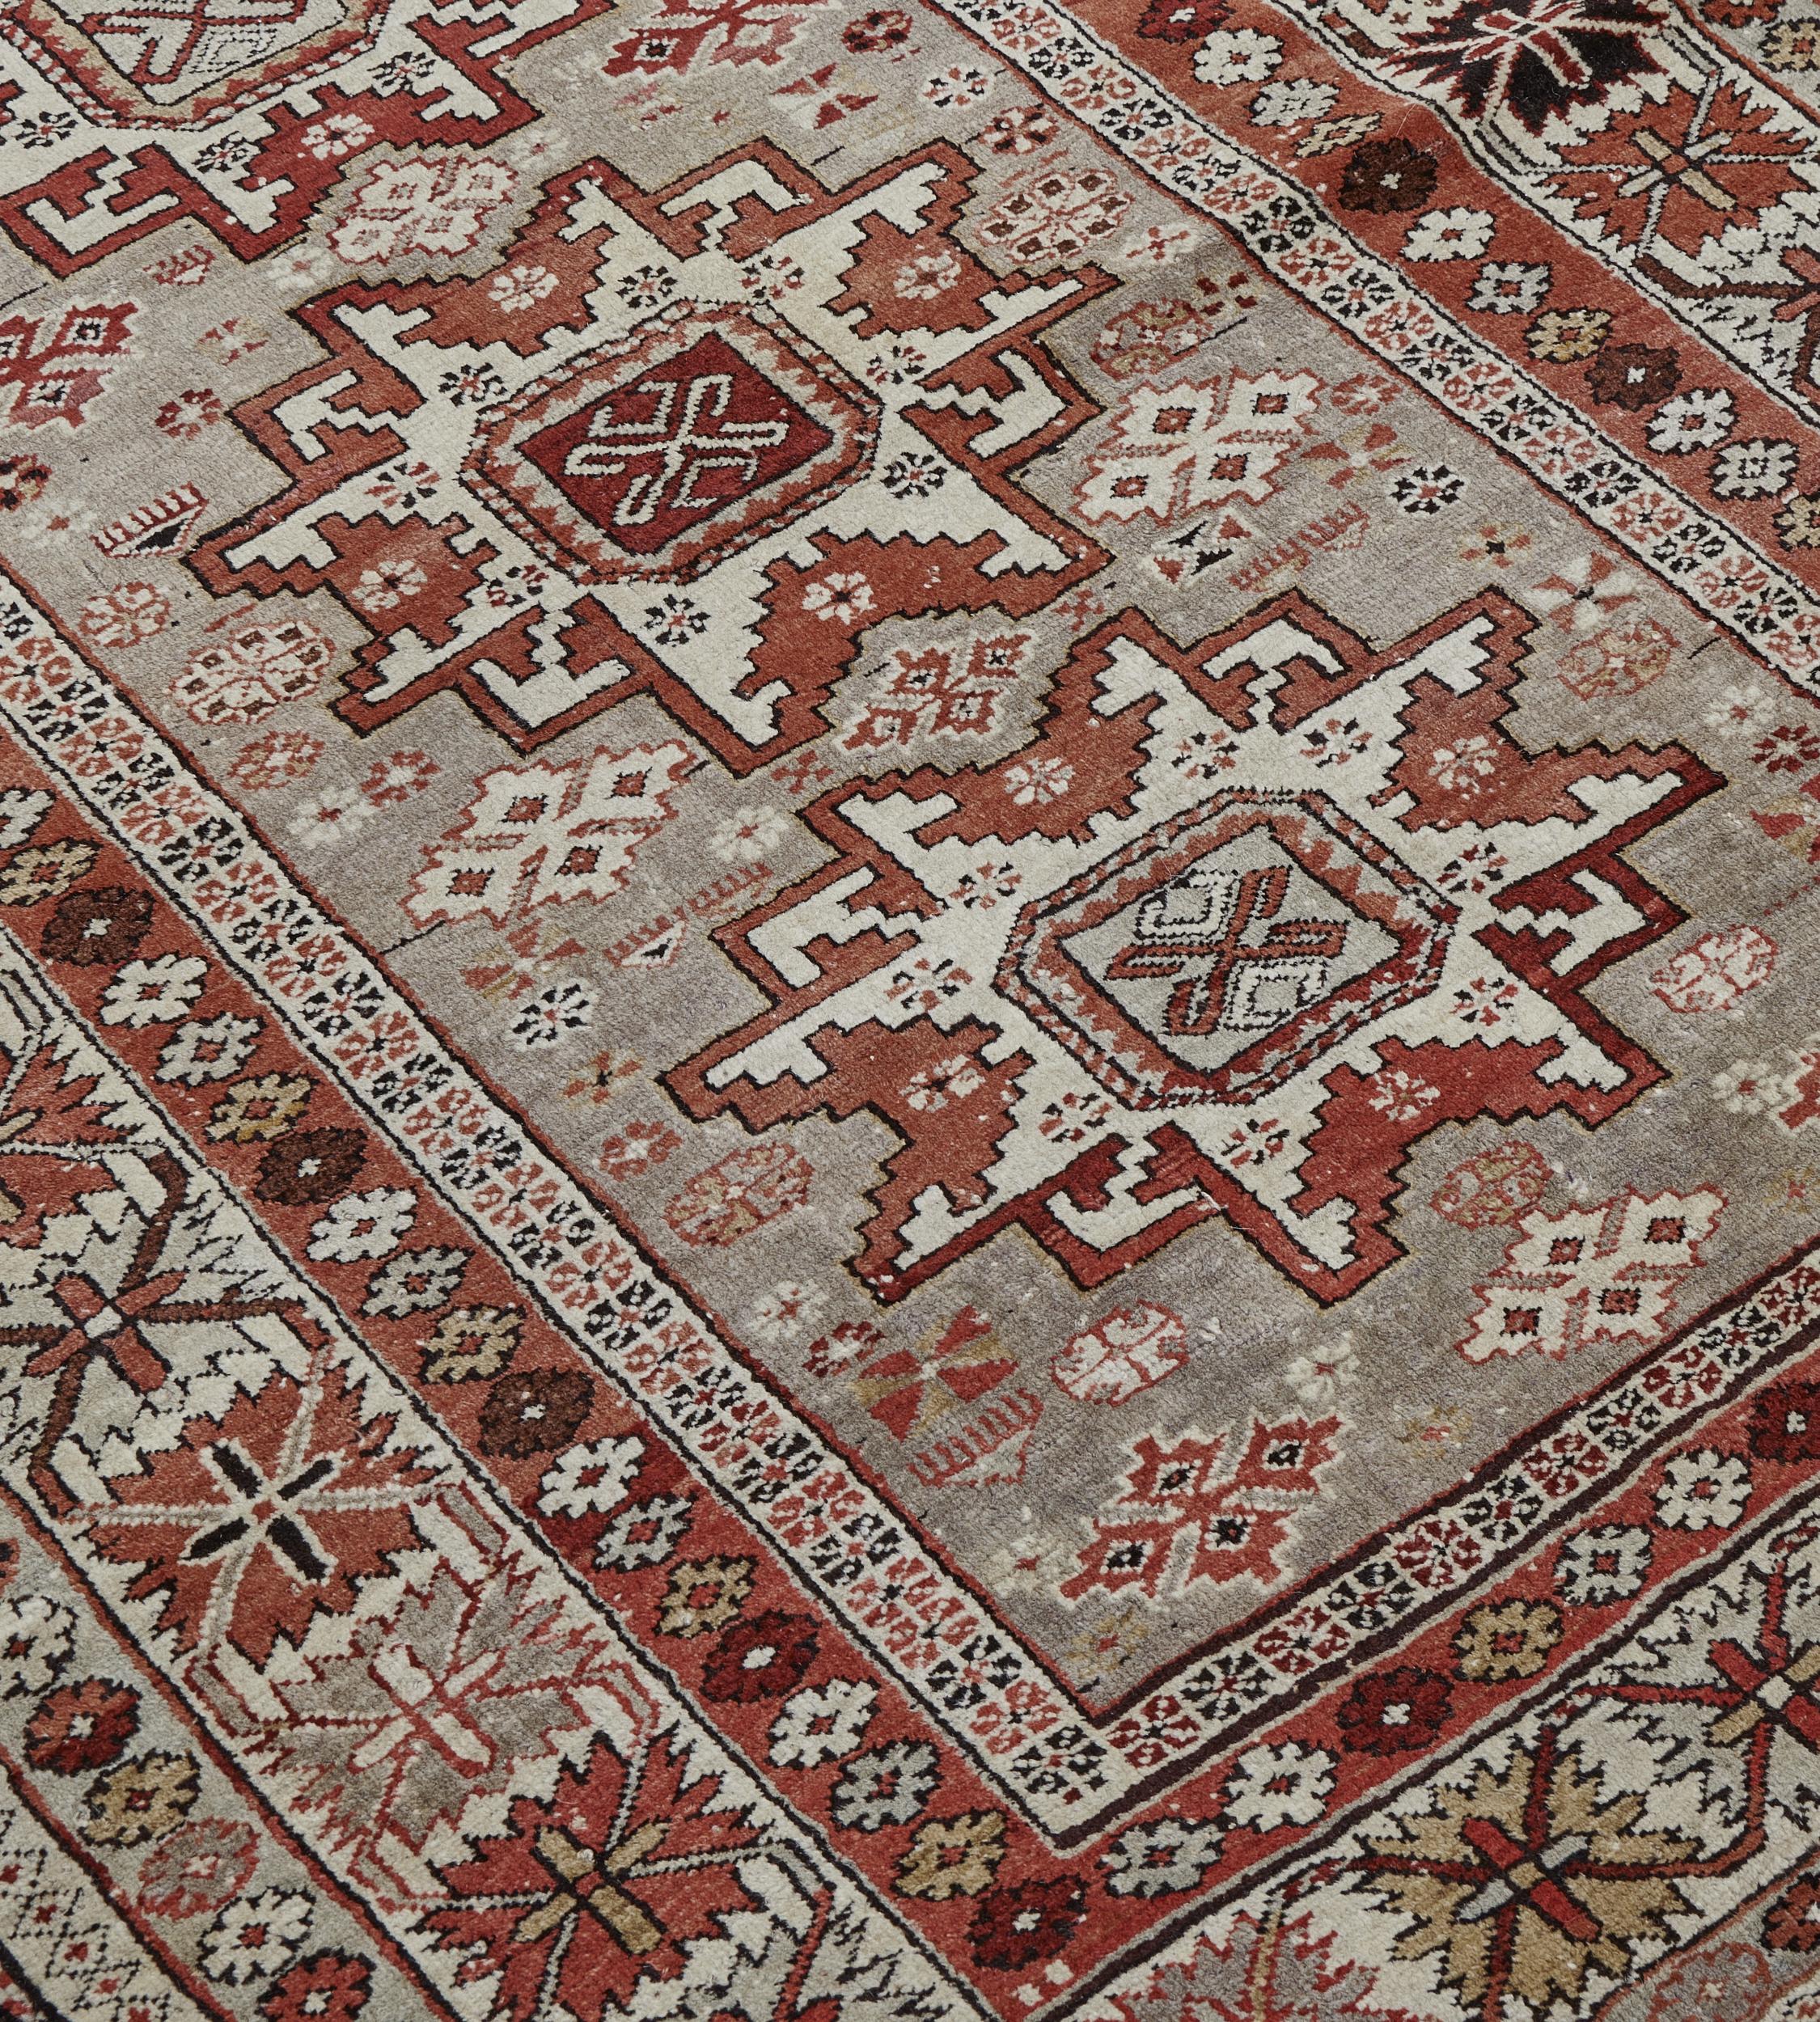 This traditional hand-woven Caucasian Shirvan rug has a gray pistachio field with stepped geometric motif enclosing a central column of stylized stepped lozenge medallions, in an ivory geometric border, between several geometric and floral stripes.